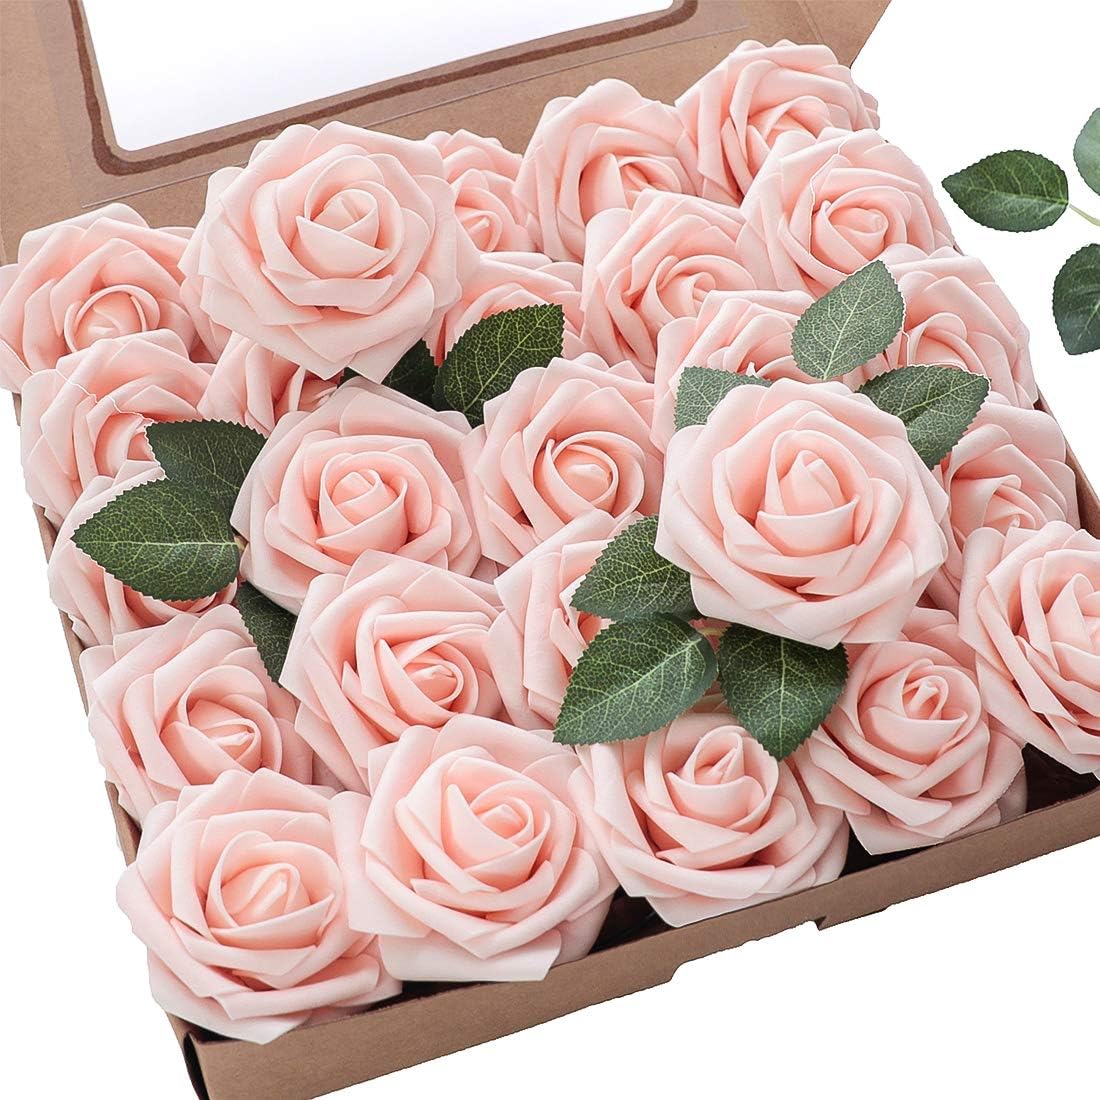 50pcs Real Looking Blush Foam Artificial Roses with Stems